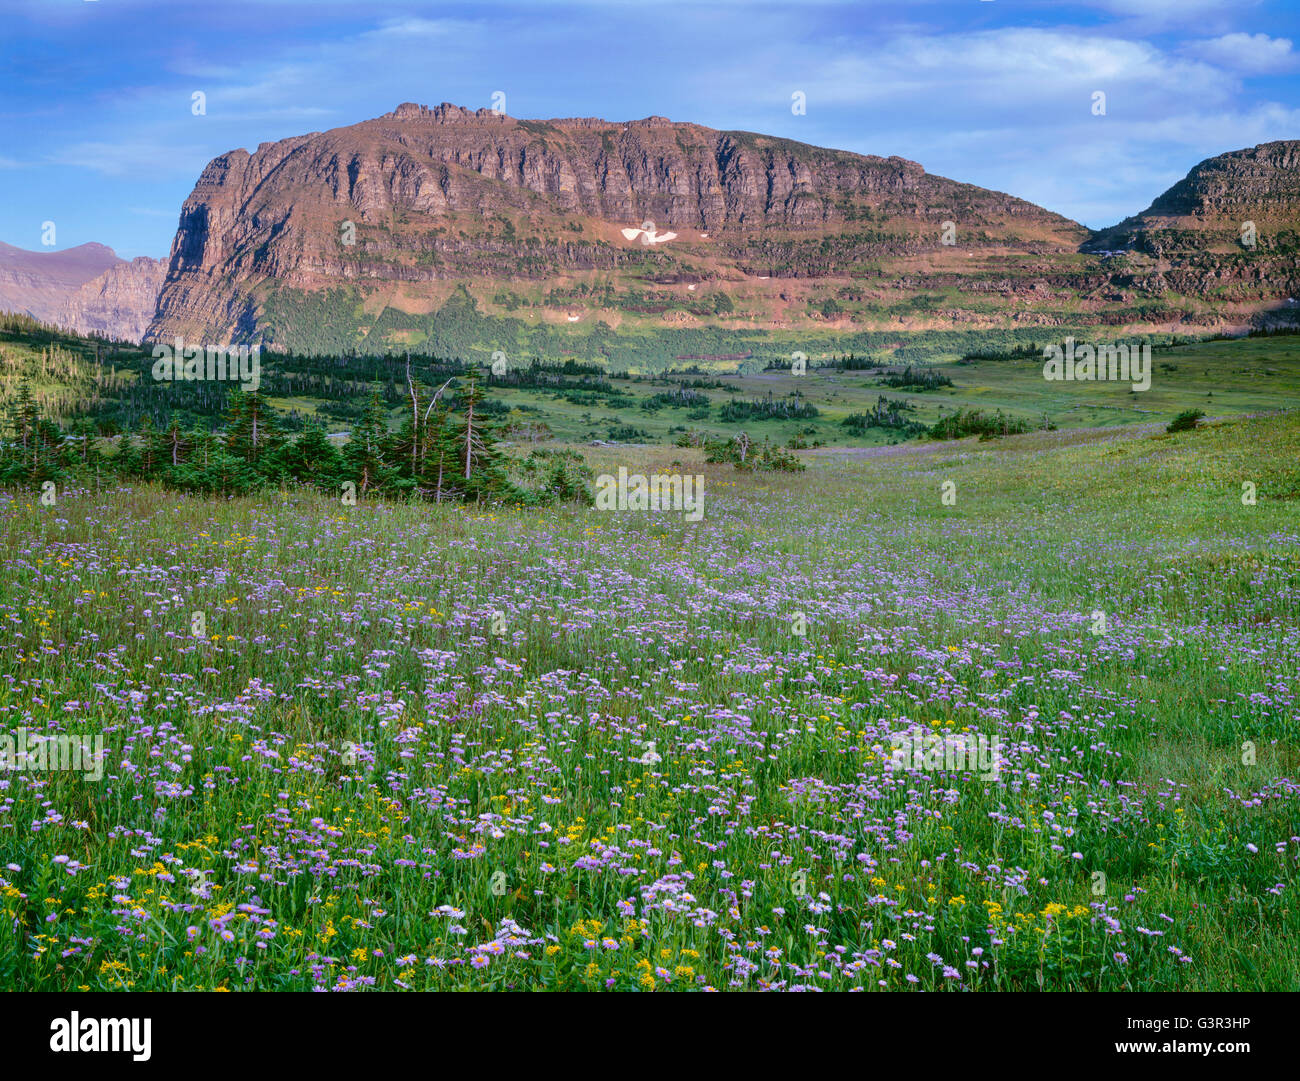 USA, Montana, Glacier National Park, Heavy Runner Mountain rises beyond meadow of fleabane and arnica above Logan Pass. Stock Photo